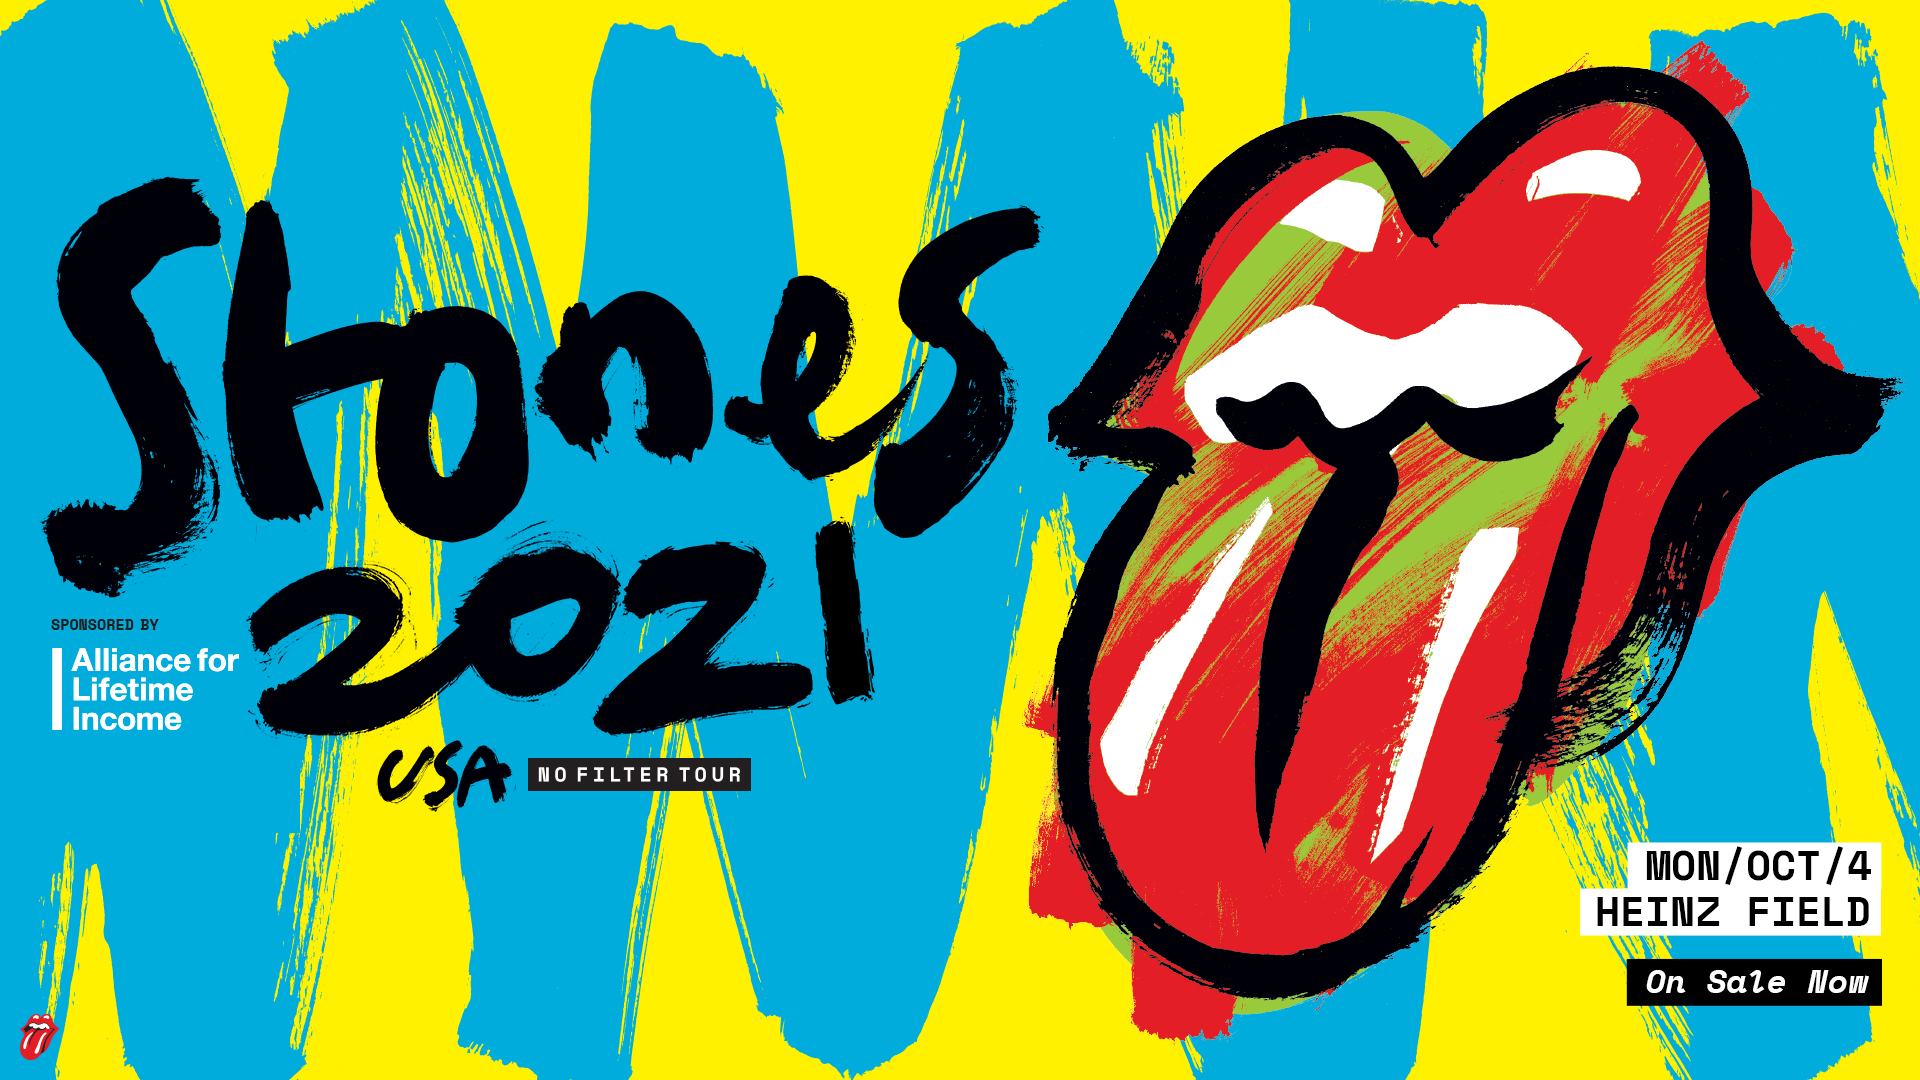 The Rolling Stones' NO FILTER tour - October 4, 2021 at Heinz Field